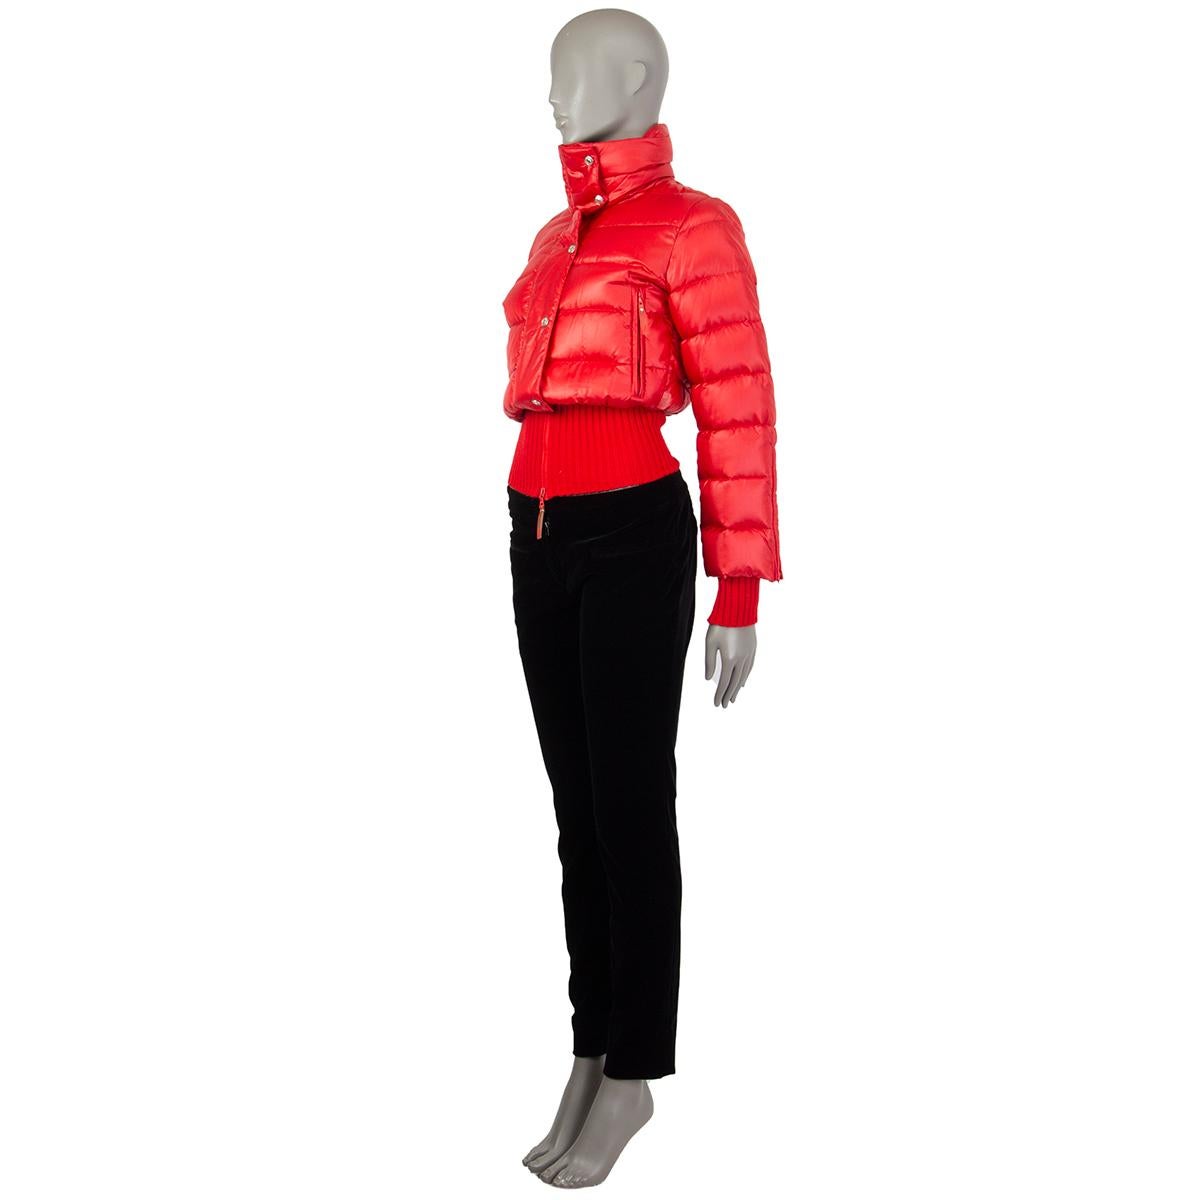 100% authentic Christian Dior puffer jacket in red nylon (100%), wool (50%), and acrylic (50%). With high collar, two zipper pockets on the sides, ribbed-knit cuffs and waist, and zipper along the sleeves. Closes with silver-tone brand snaps and